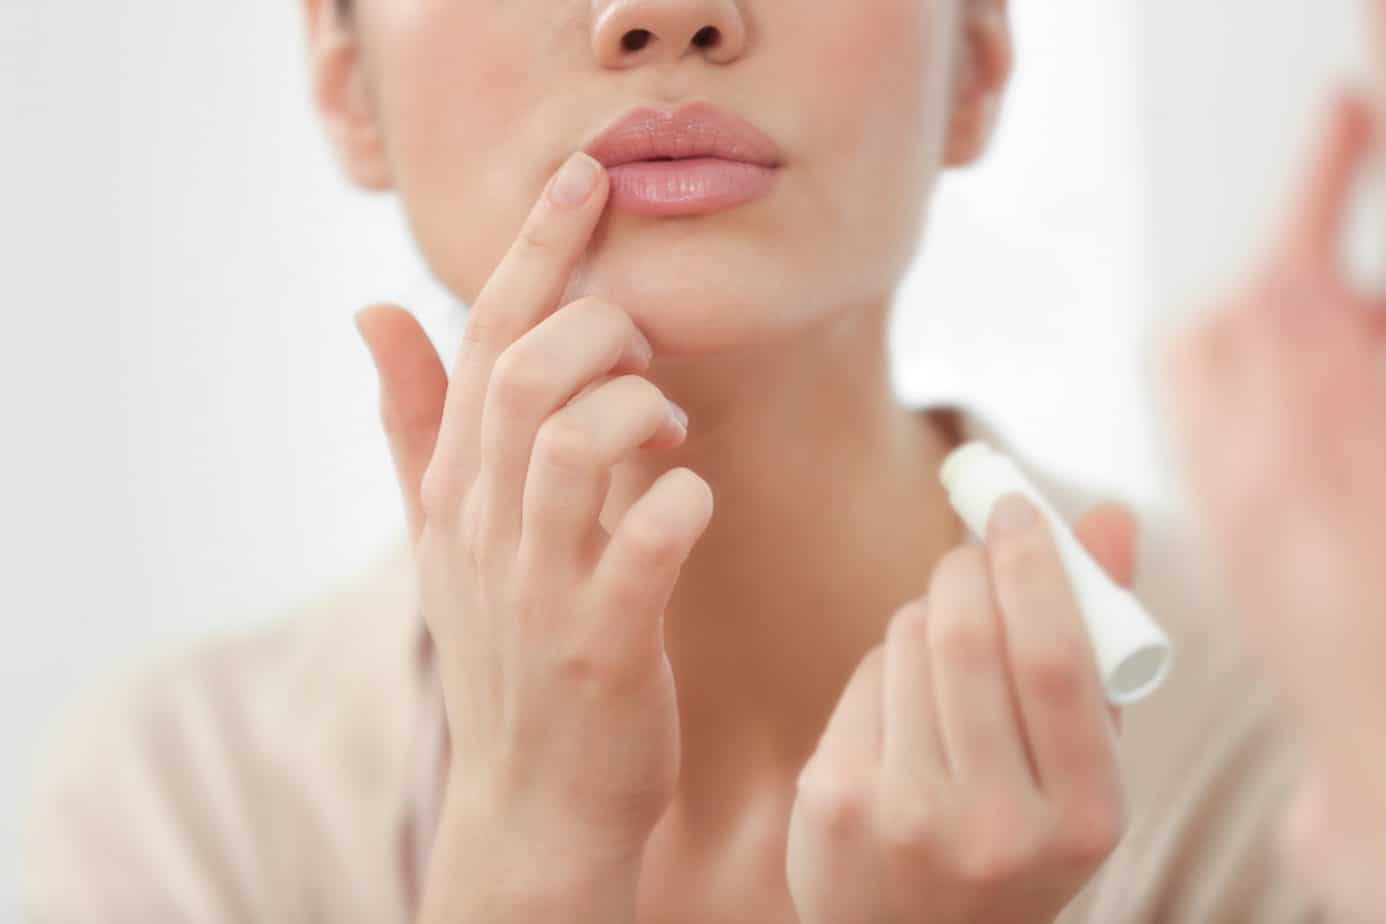 Lip balm – what to consider when buying?